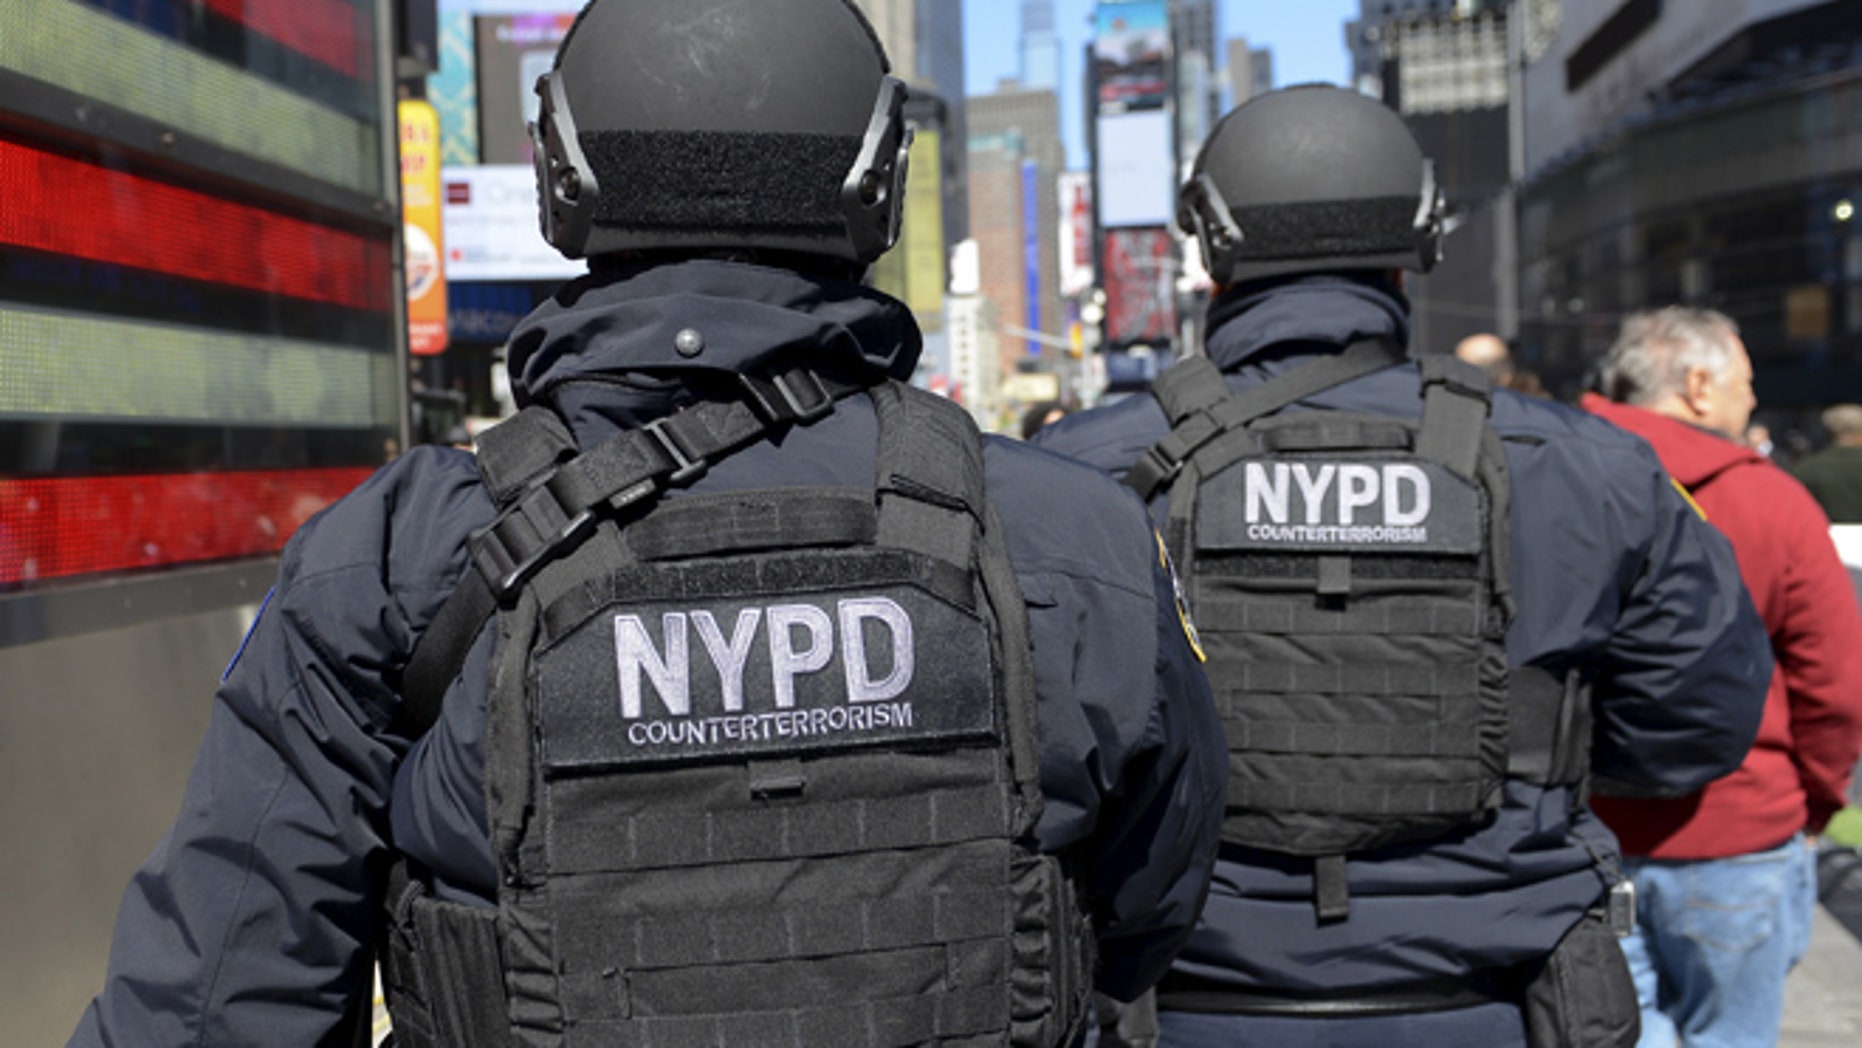 NYPD contacts thousands whose names appear on 'terror target